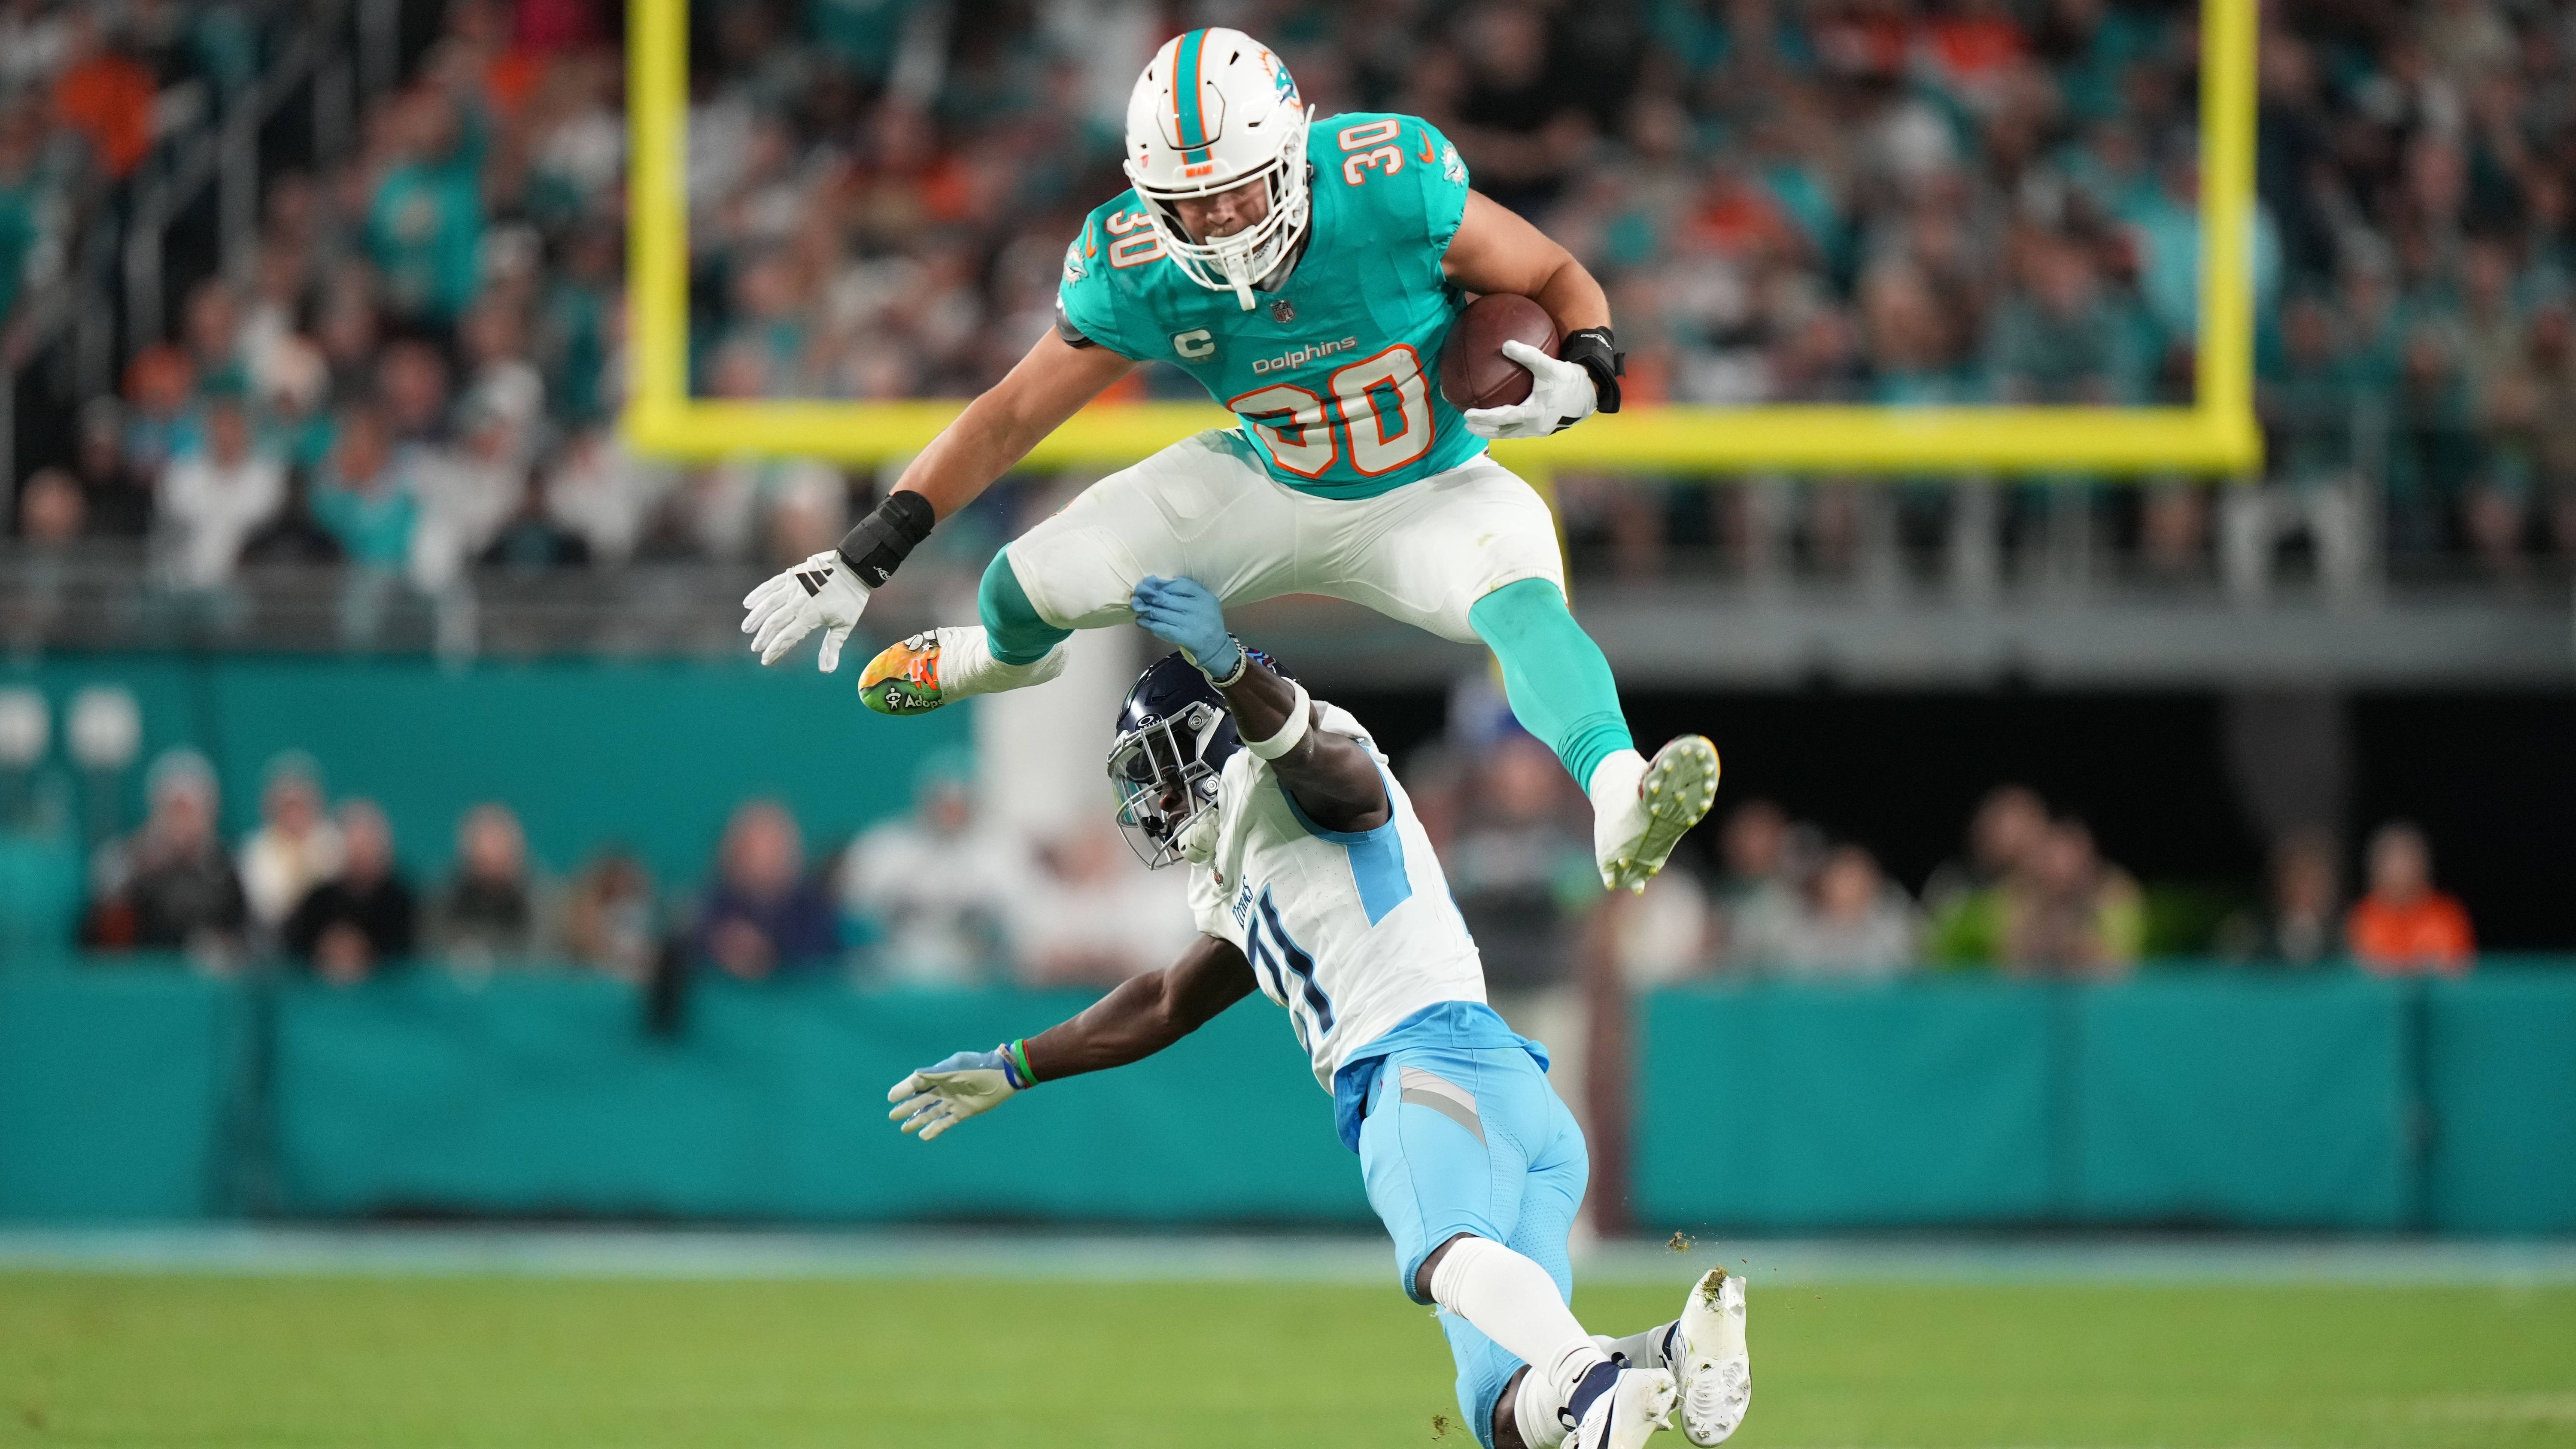 <strong>AFC: Fullback</strong><br>Starter: Alec Ingold (Miami Dolphins)